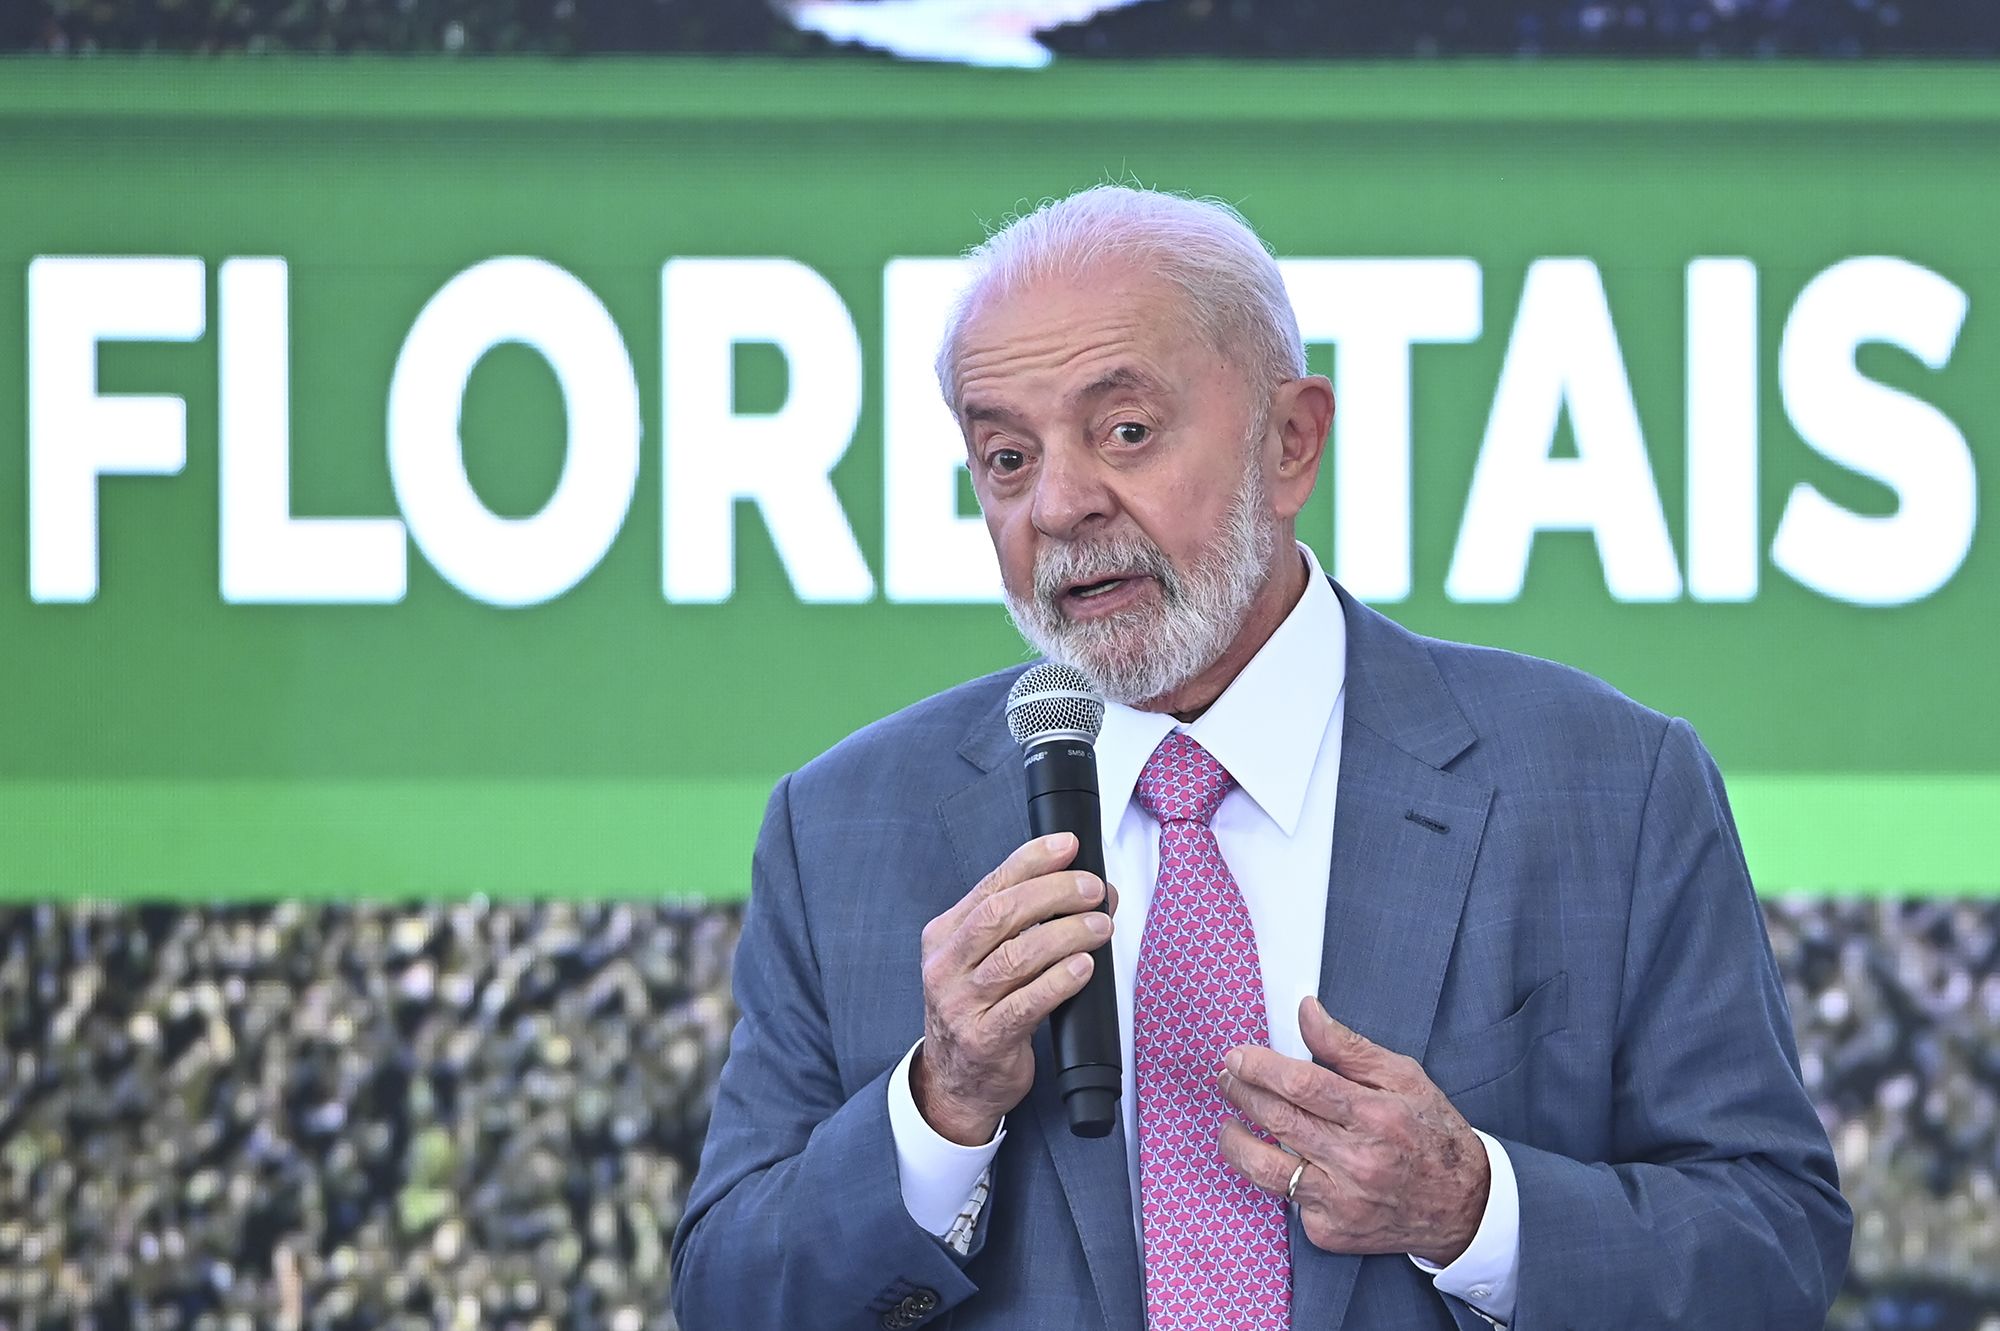 Brazilian President Lula indirectly calls out Elon Musk on climate crisis,  further fueling tensions